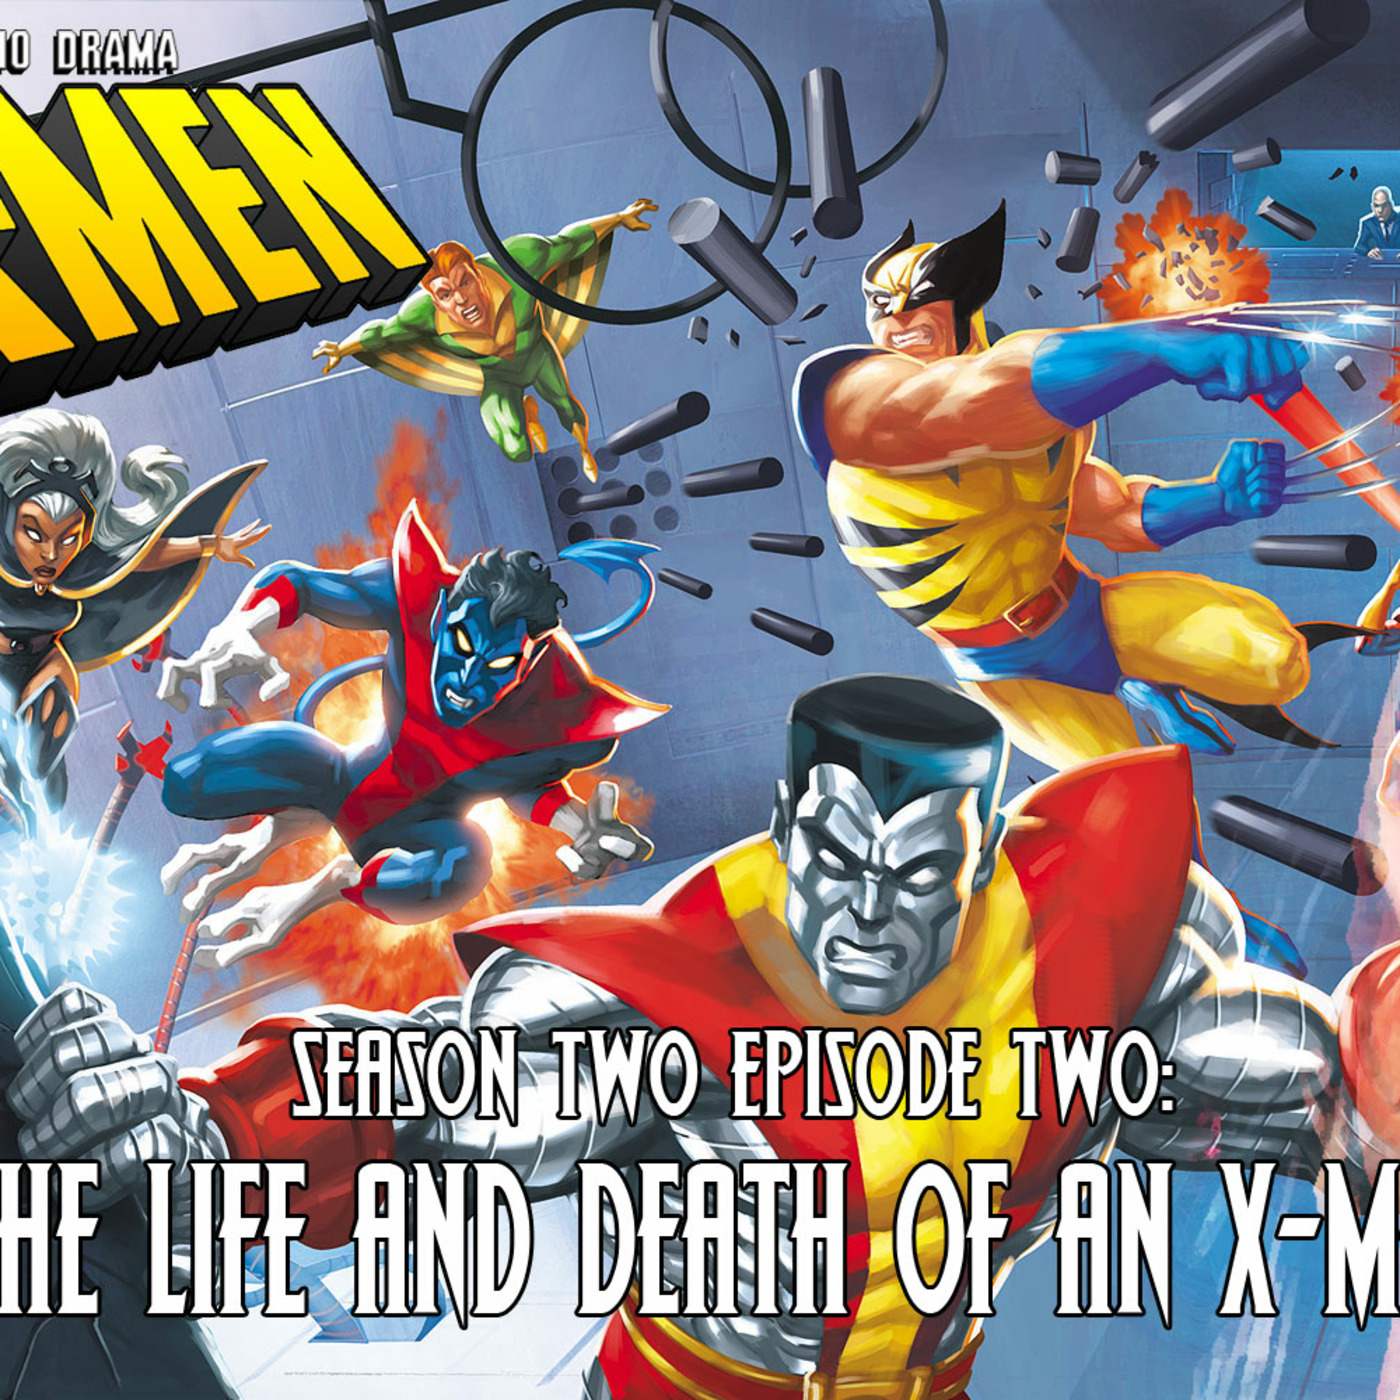 Episode 2: S2 Episode 2: The Life and Death of an X-Man